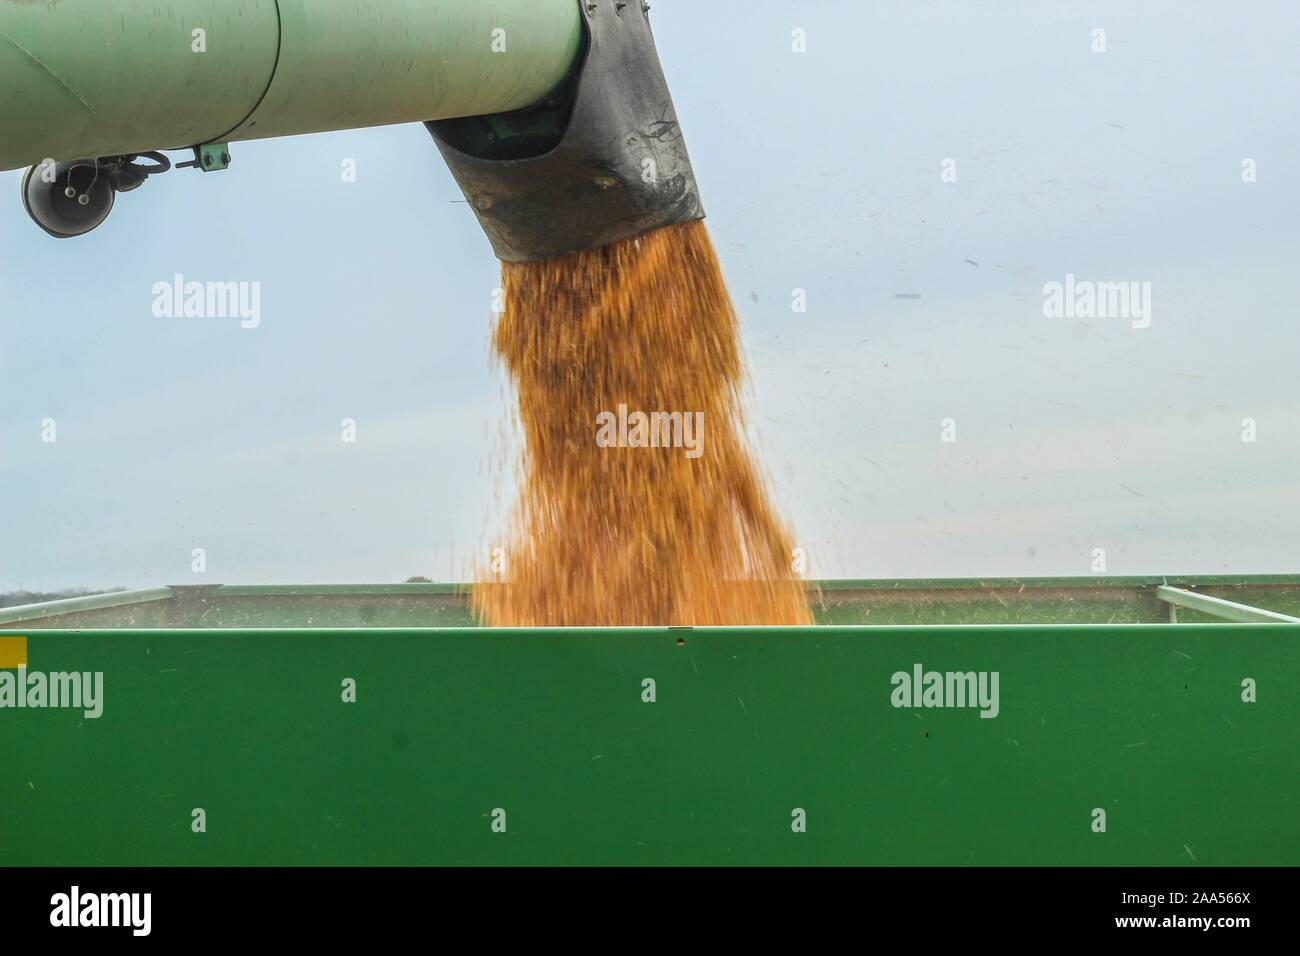 Combine unloading a load of grain into a wagon during harvest in Central Illinois Stock Photo